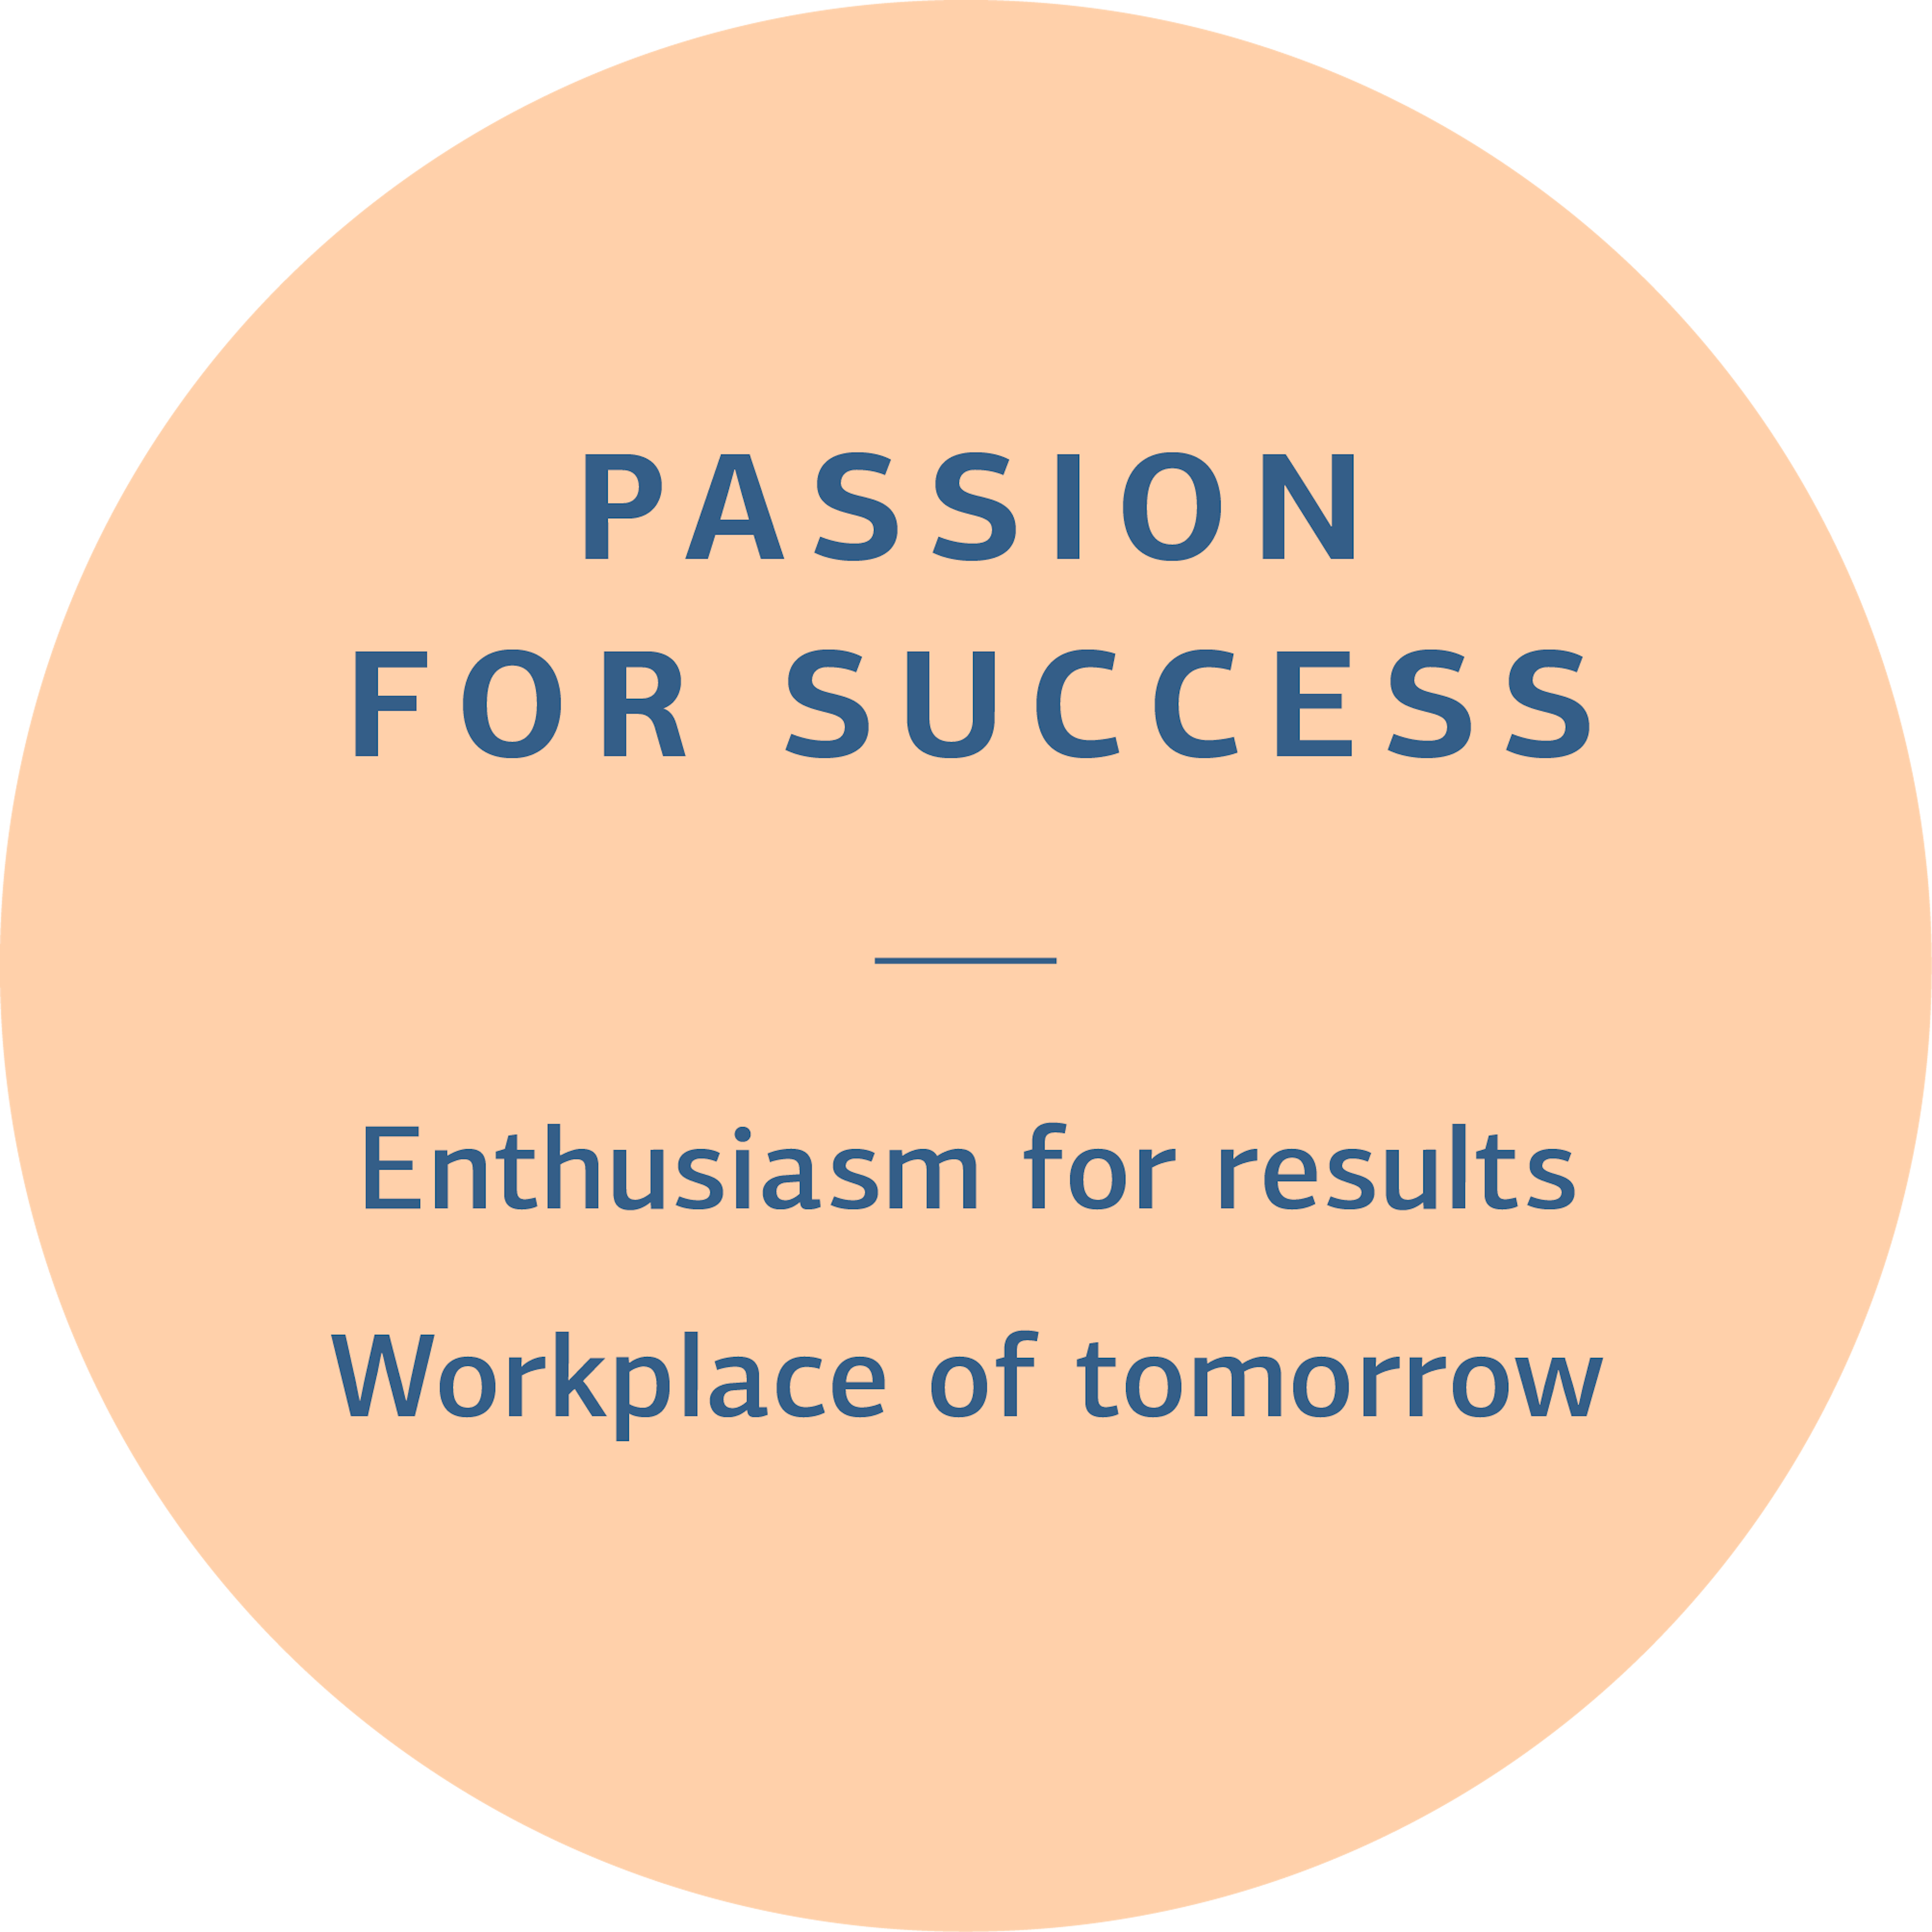 Passion for success